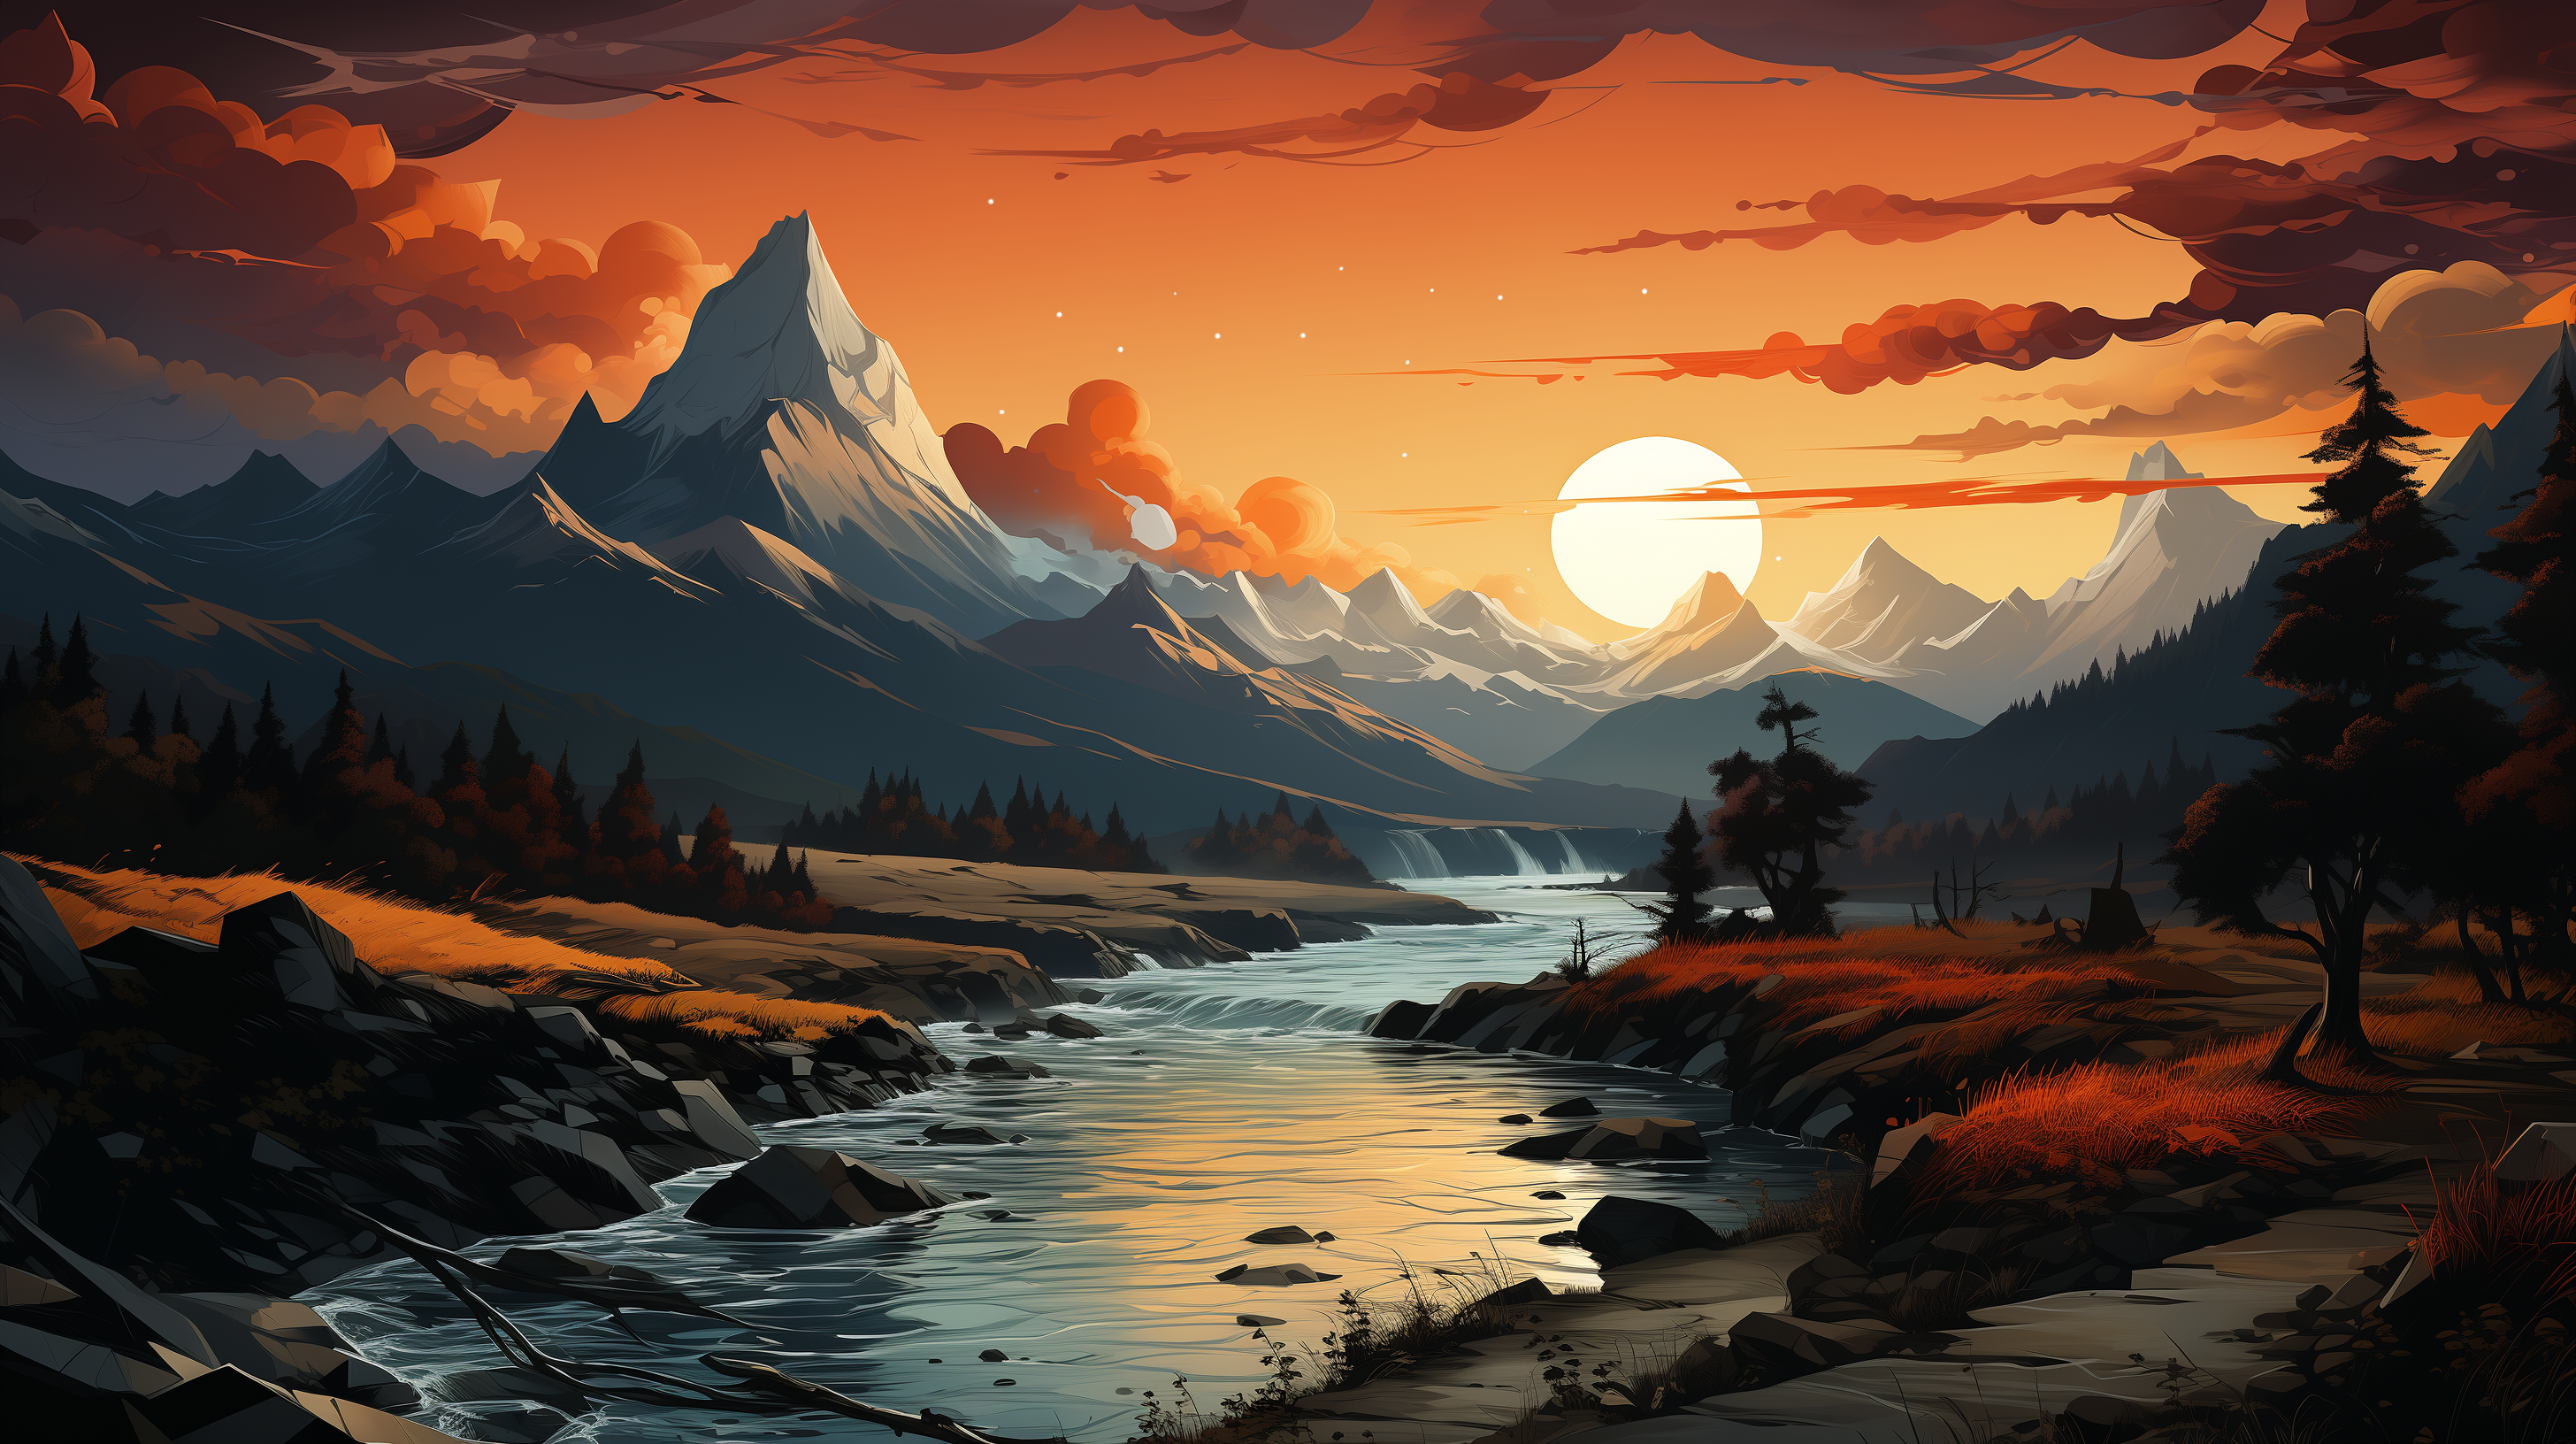 HD wallpaper of a vibrant sunset over a mountainous landscape with a river flowing through it.